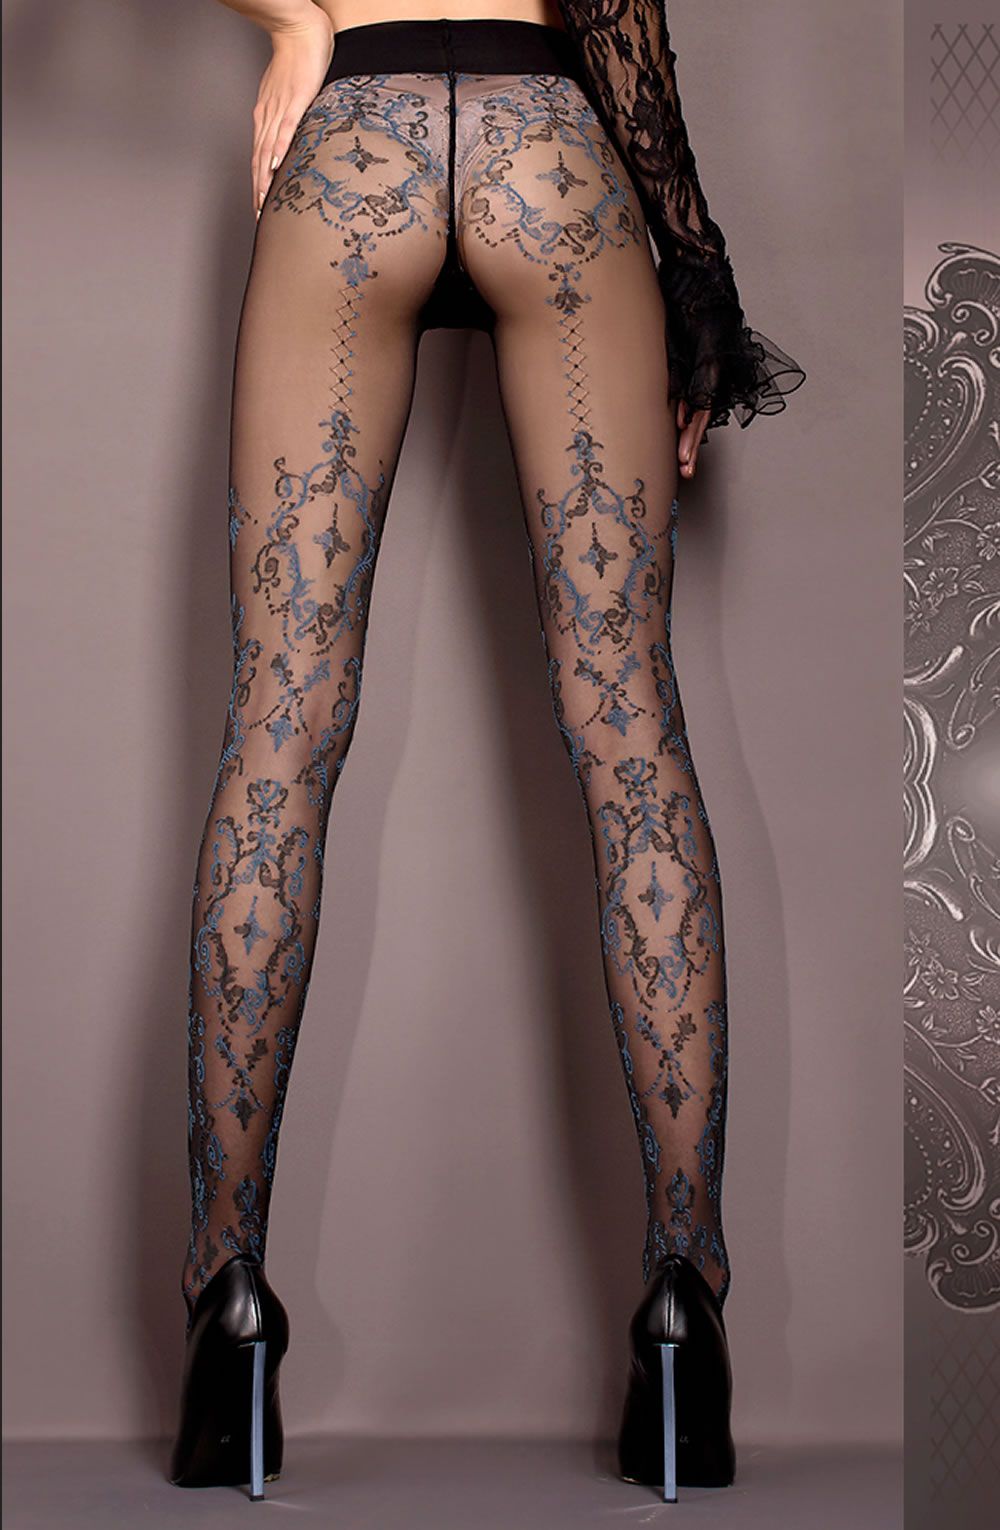 Gorgeous tights with floral design